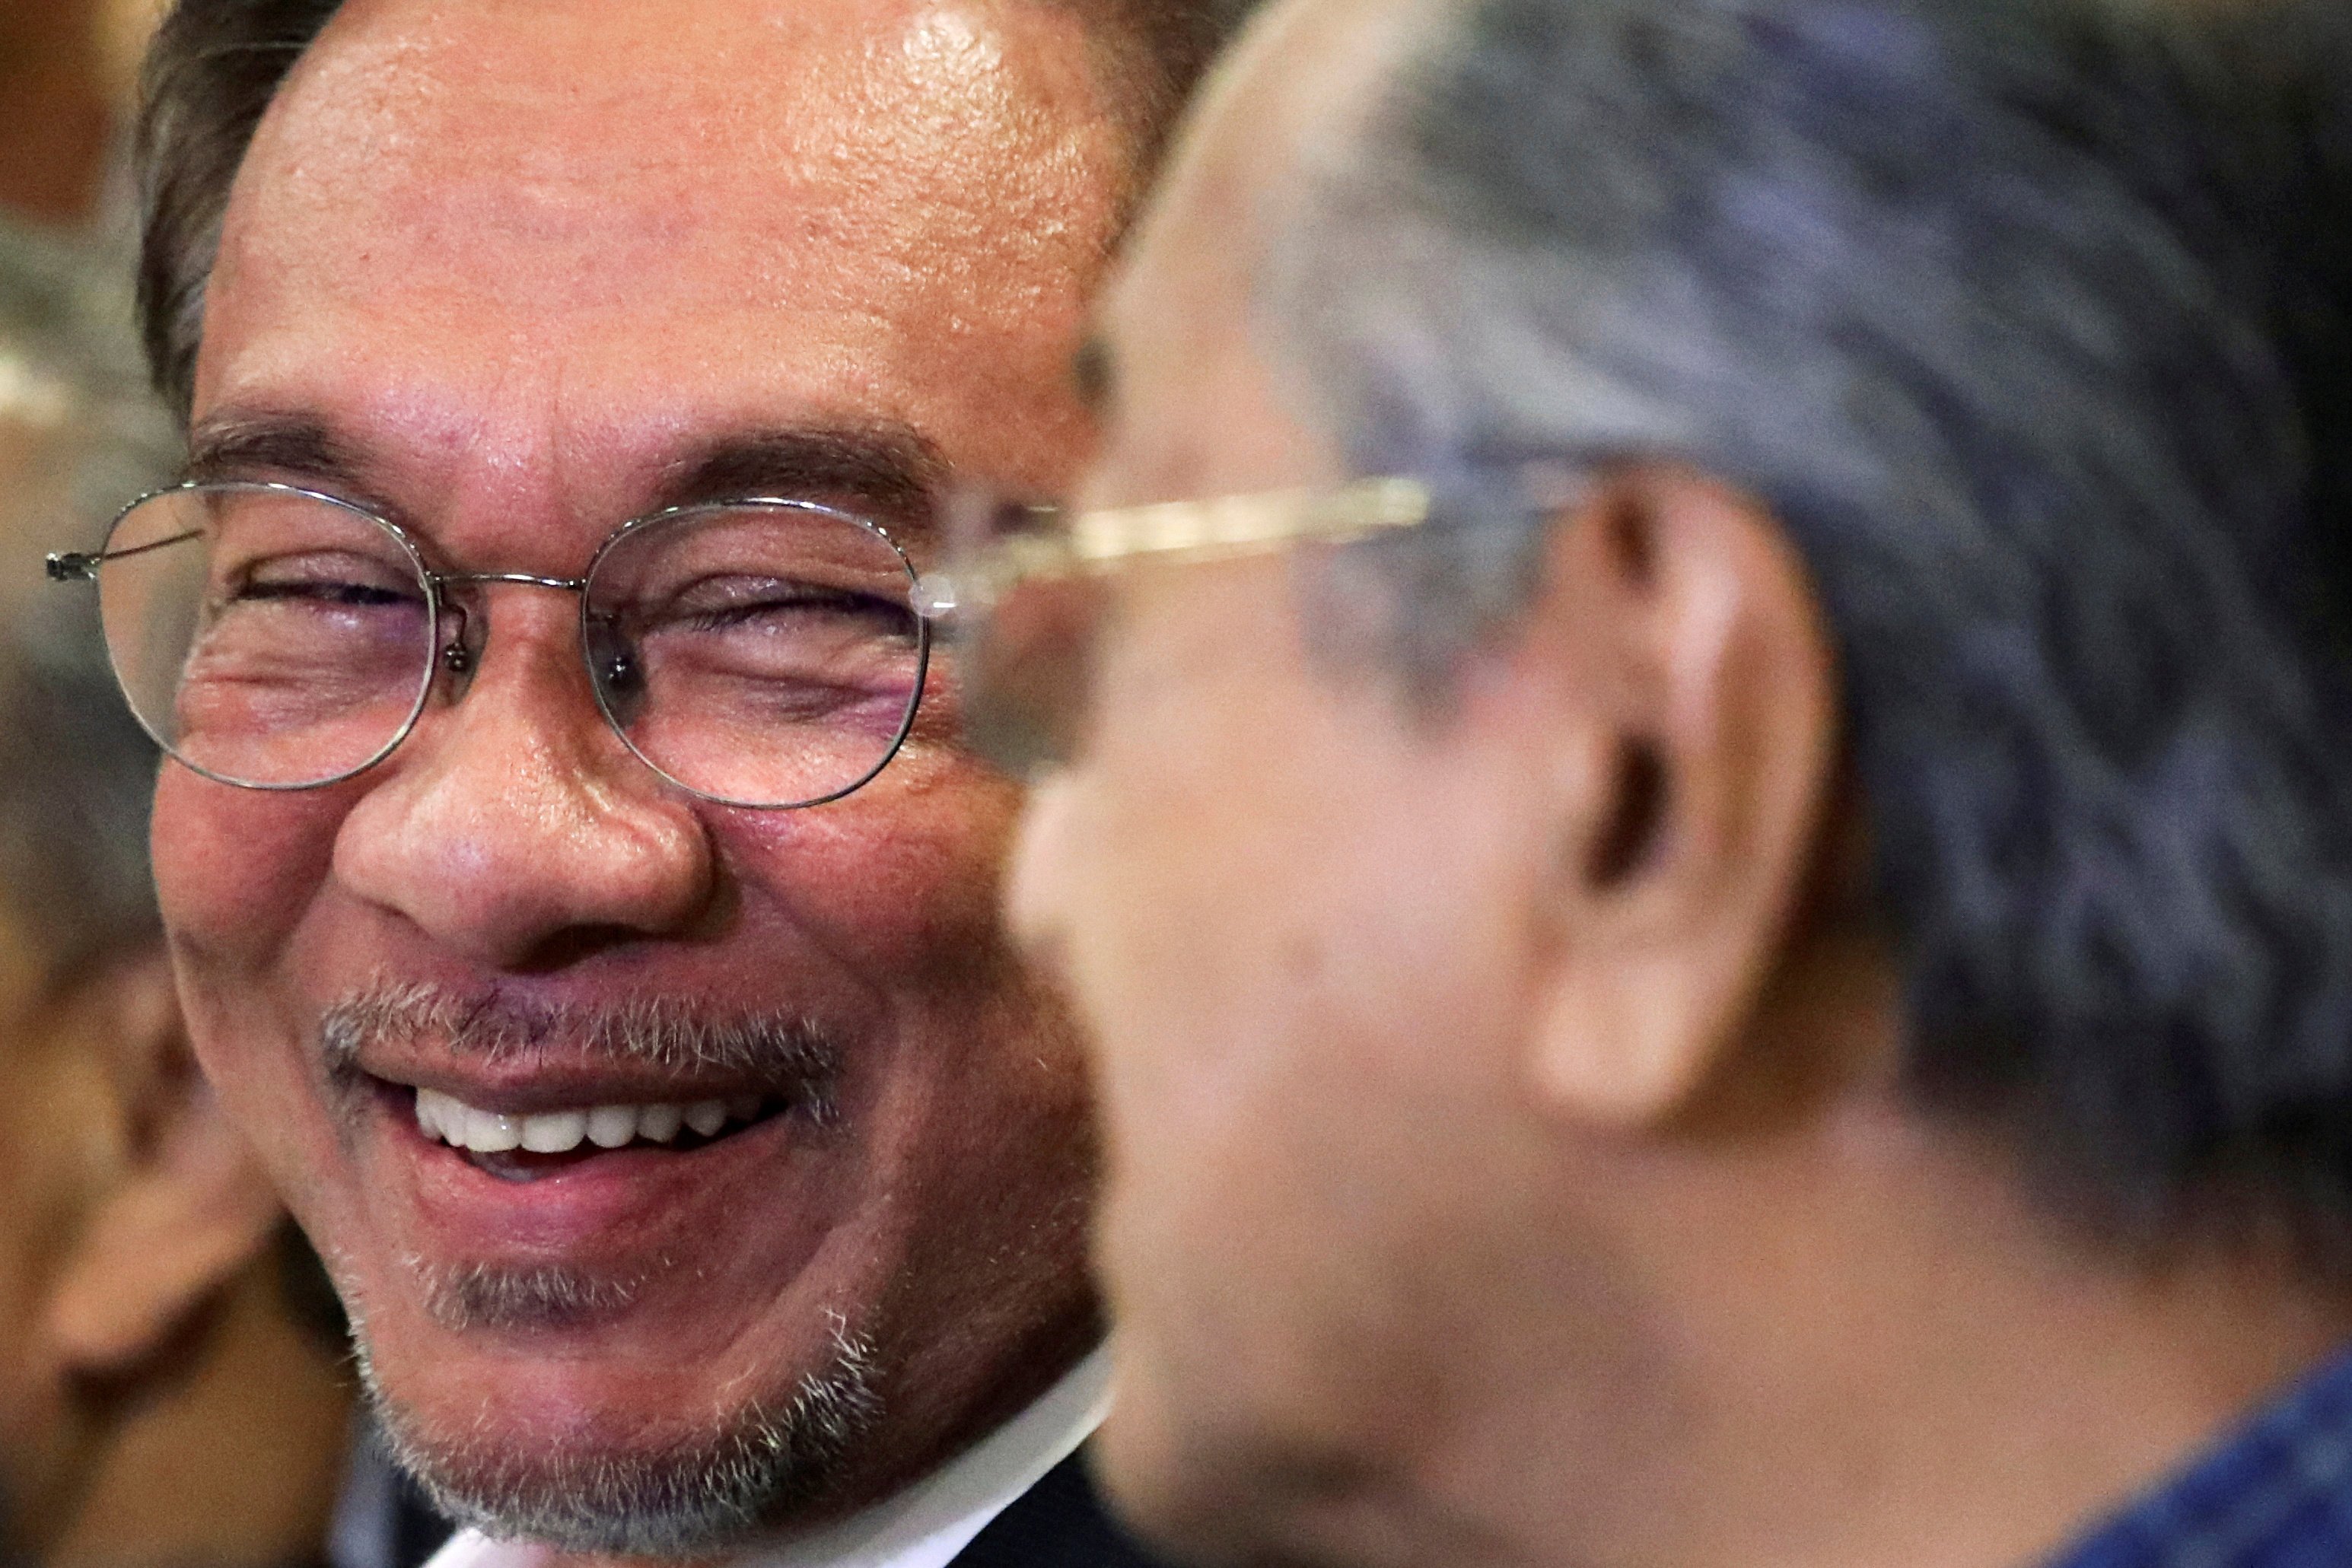 Malaysian politician Anwar Ibrahim looks at Malaysia’s Prime Minister Mahathir Mohamad during a news conference in Putrajaya, on November 23, 2019.  Photo: Reuters